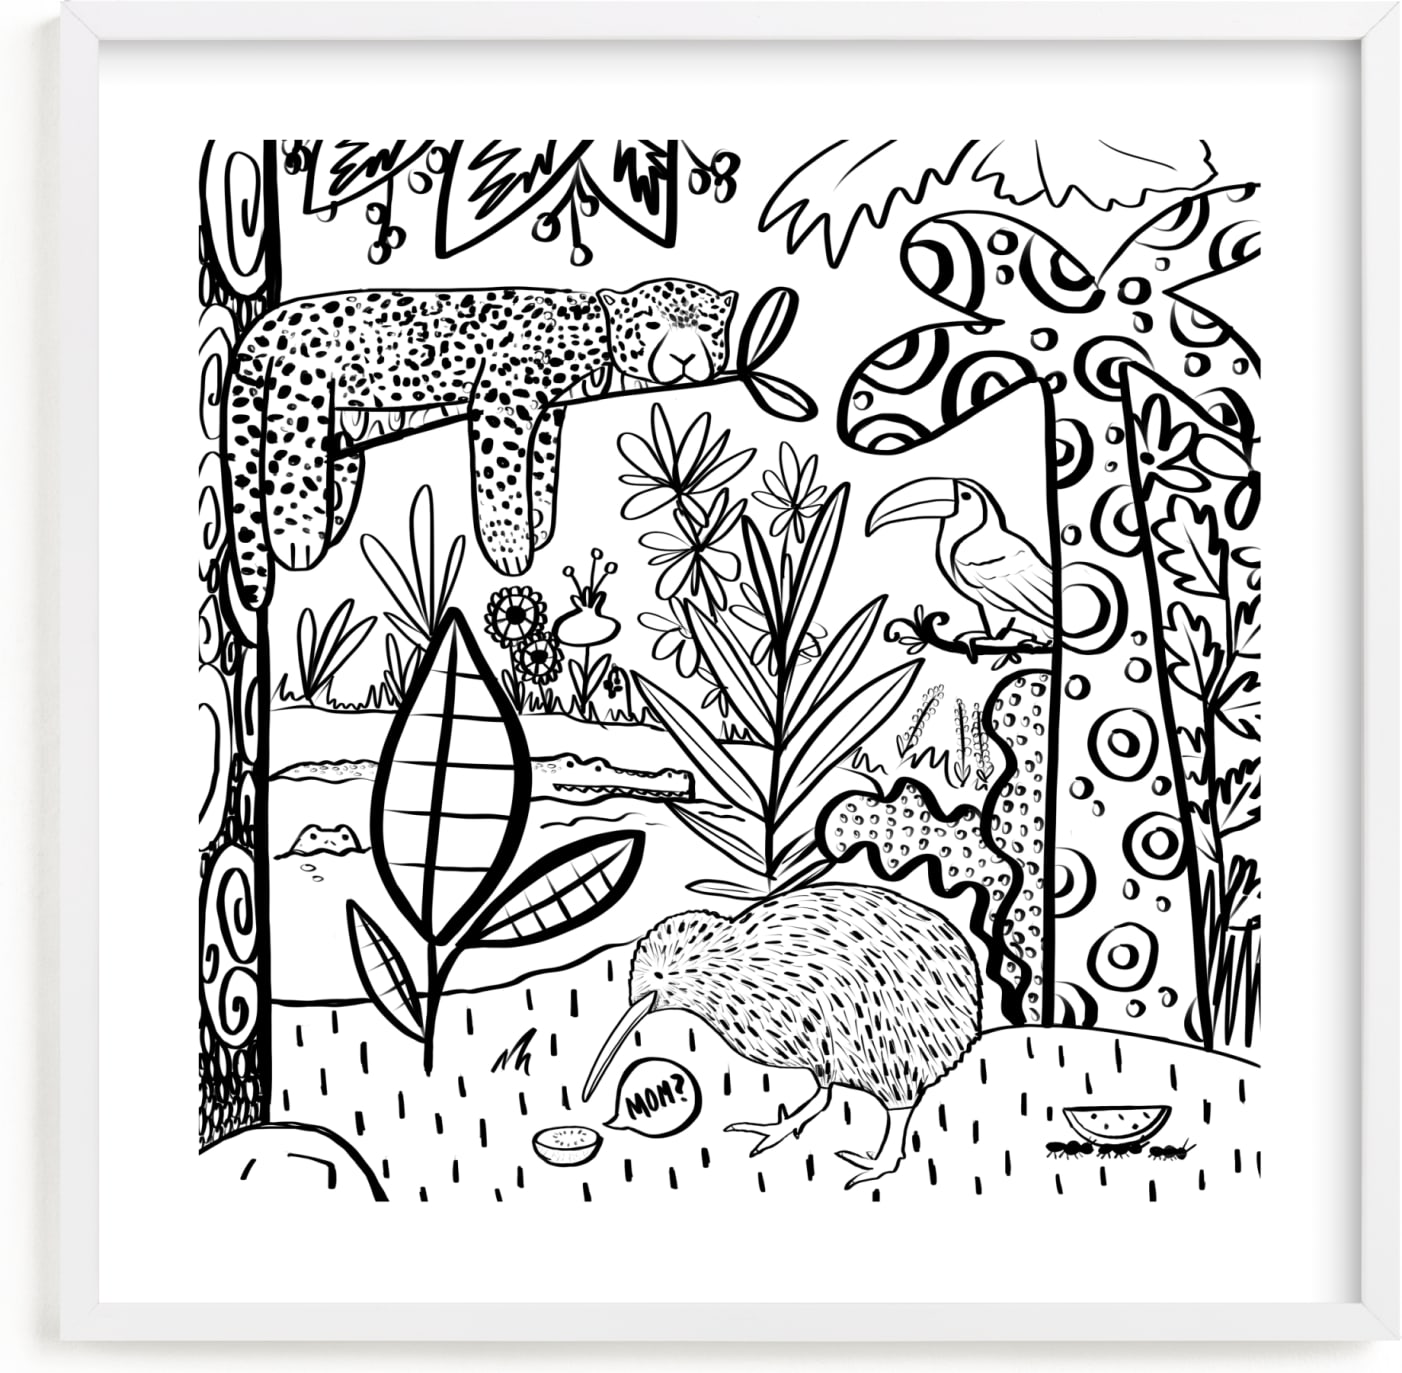 This is a black and white kids wall art by Megan Zang called Classic Kiwi.